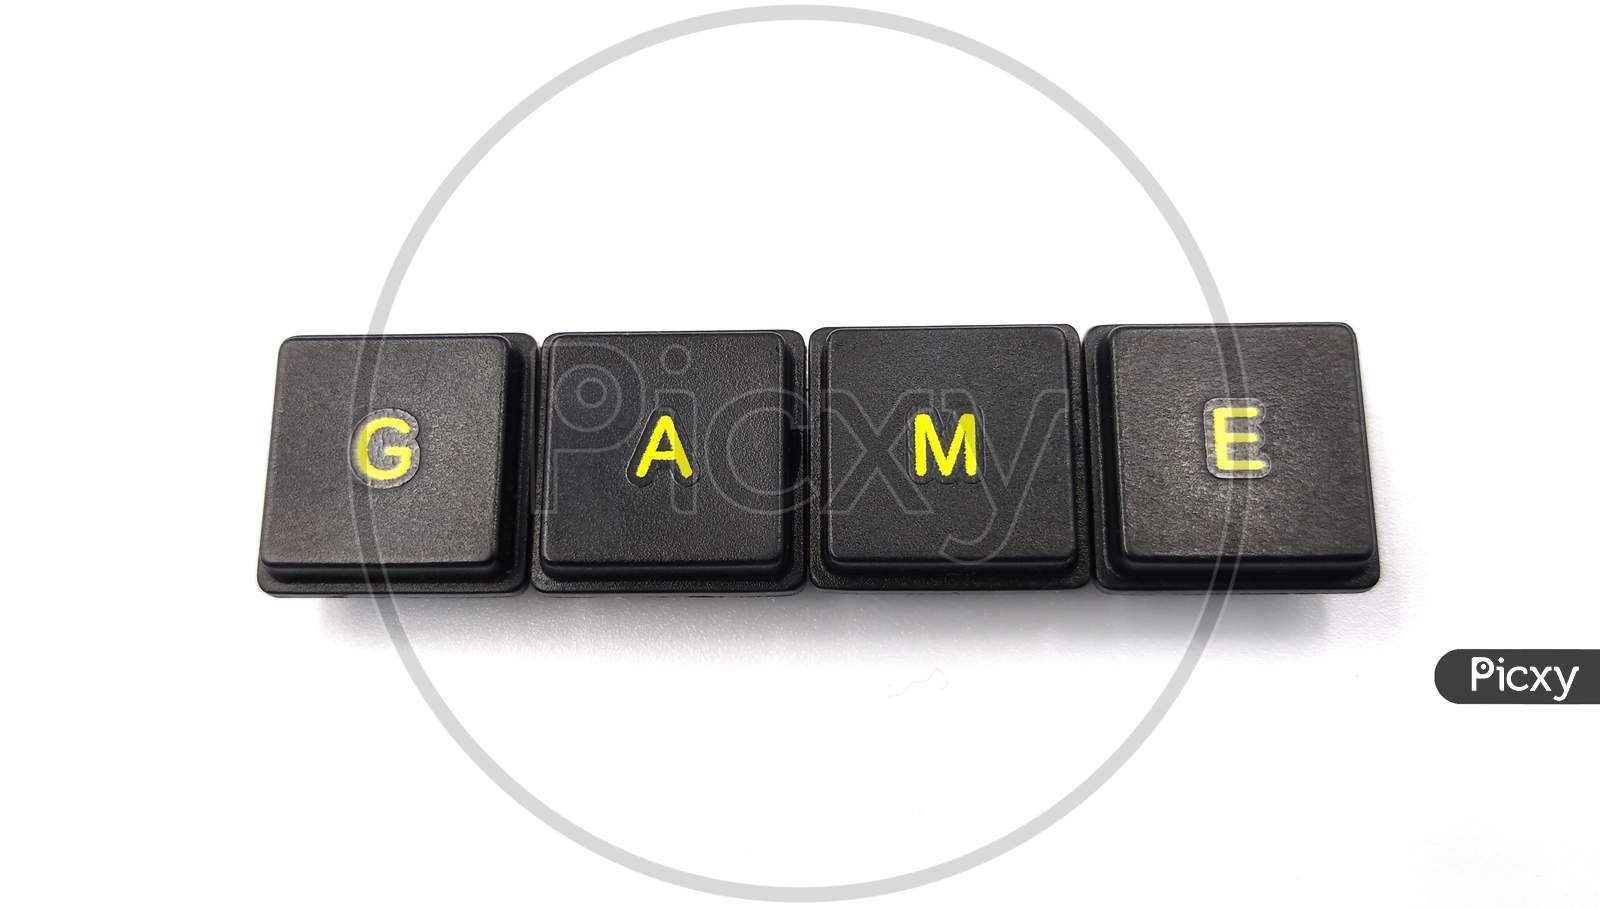 game word spelled out on white background